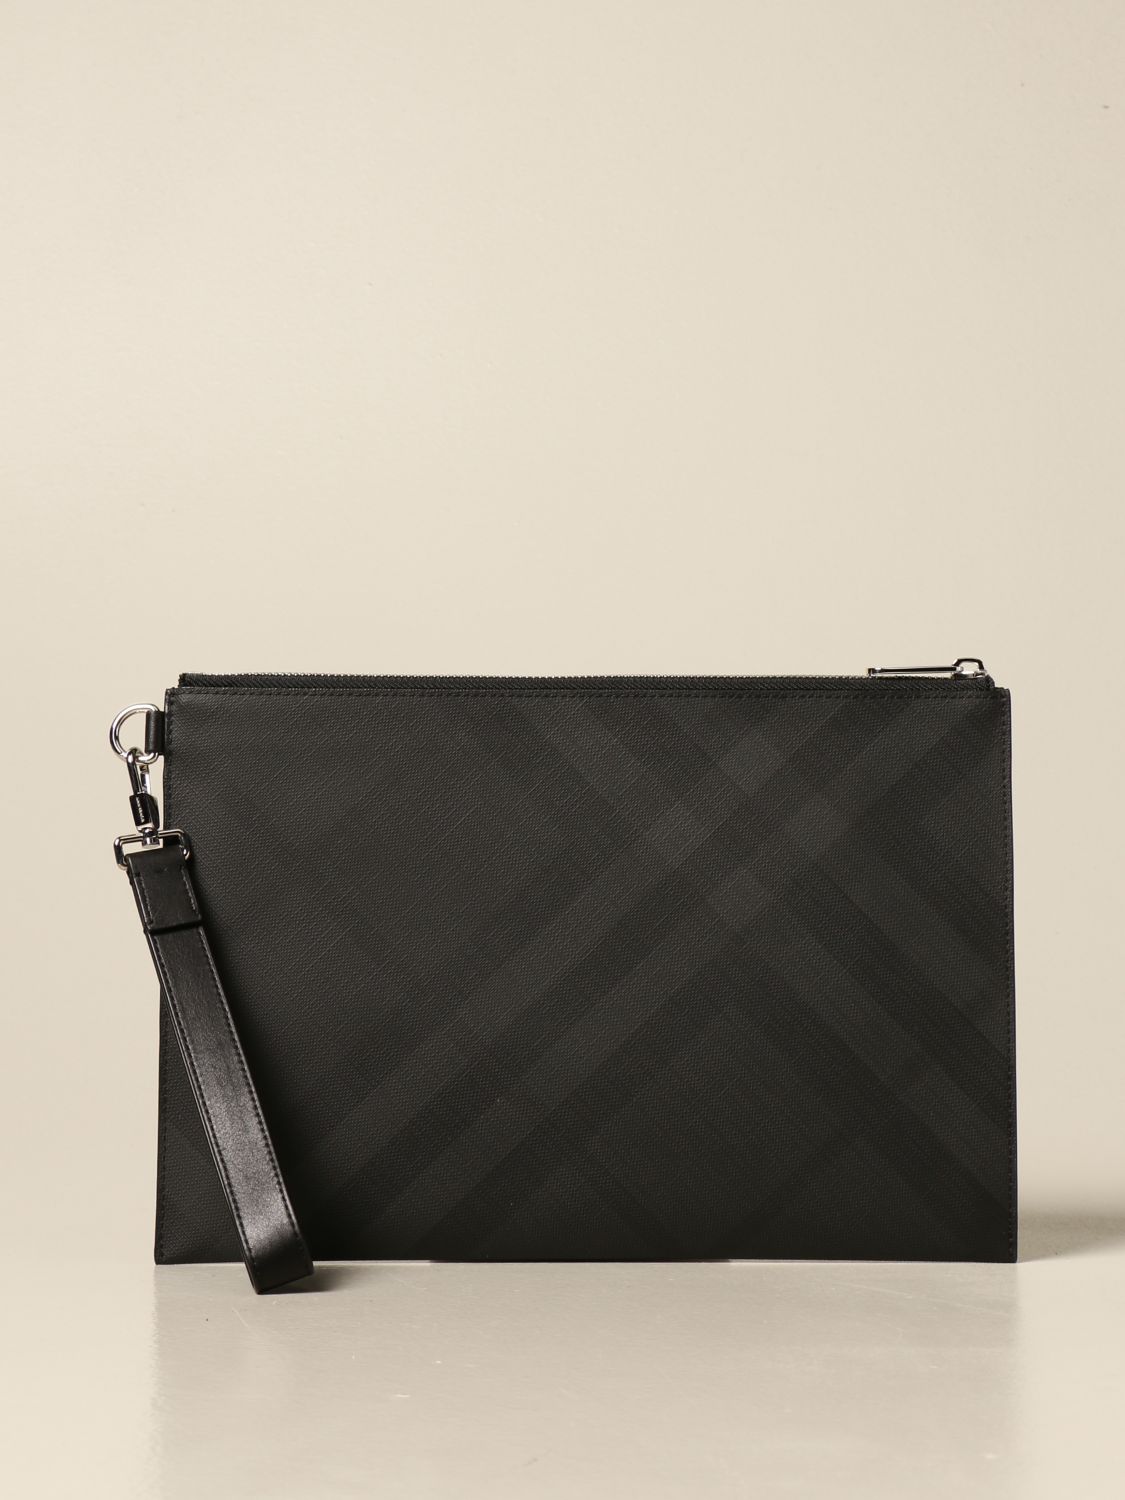 BURBERRY: clutch with London check pattern | Briefcase Burberry Black | Briefcase 8014525 GIGLIO.COM